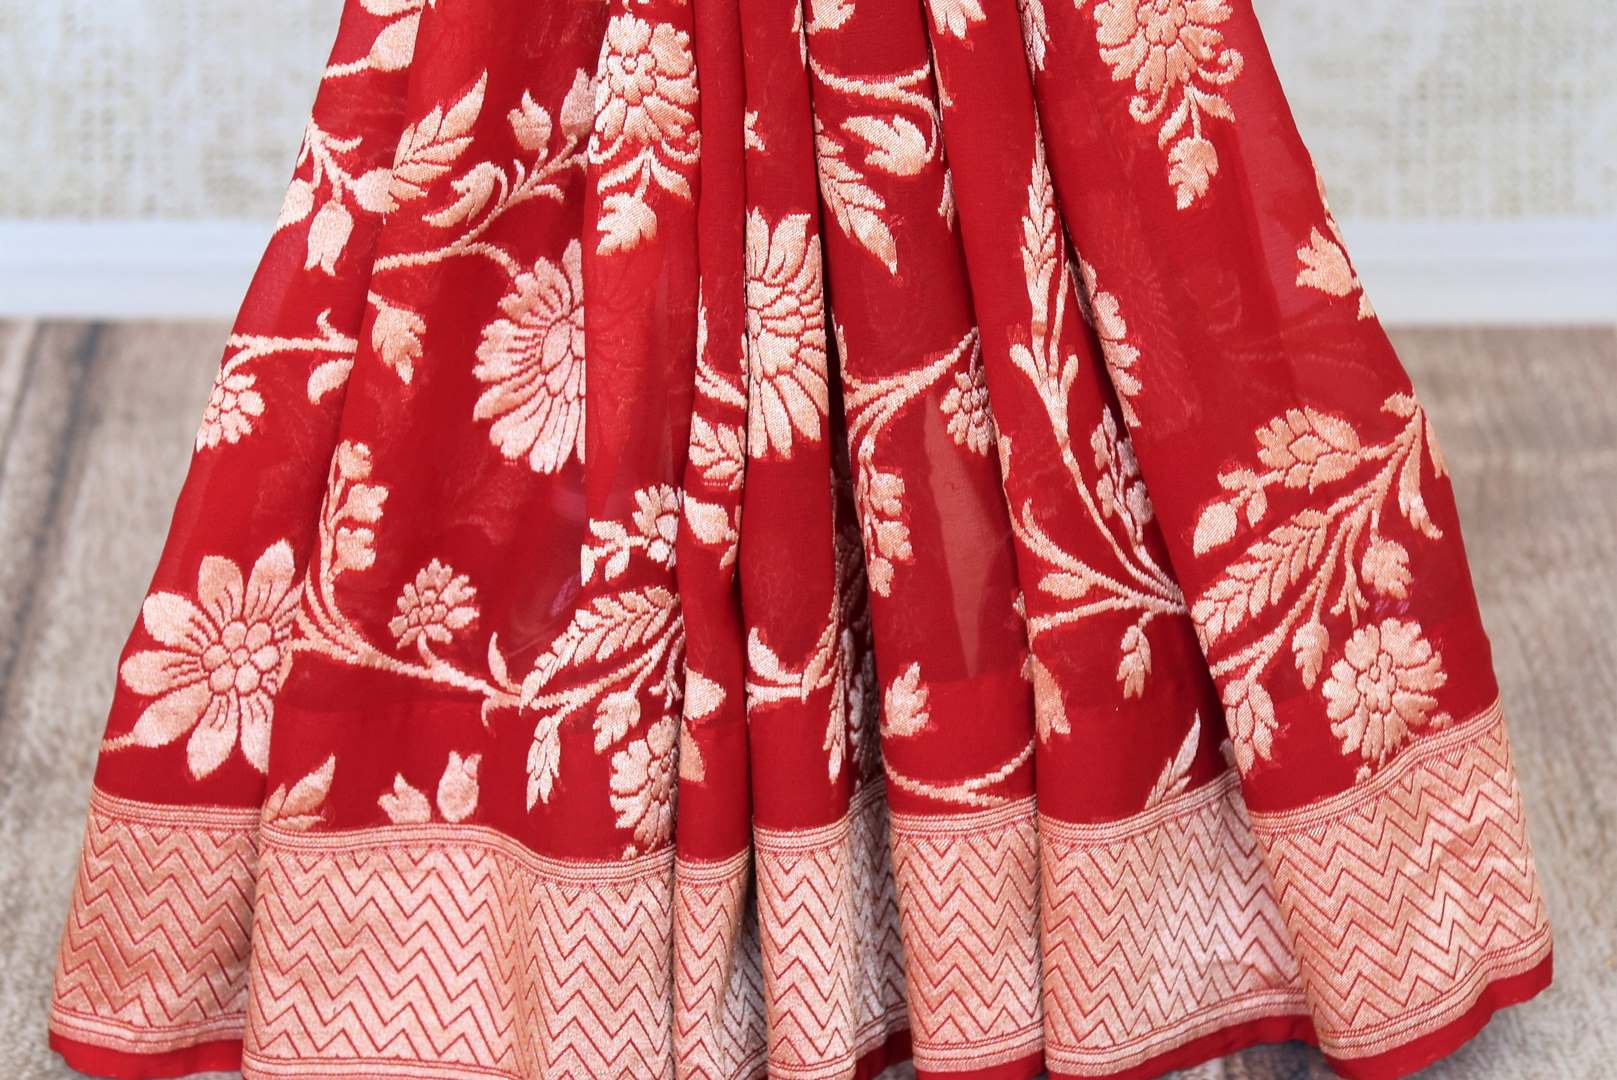 Shop traditional red georgette Banarasi saree online in USA with foliate zari work. Feel traditional on special occasions in beautiful Indian designer saris from Pure Elegance Indian fashion store in USA. Choose from a splendid variety of Banarasi sarees, pure handwoven saris. Buy online.-pleats